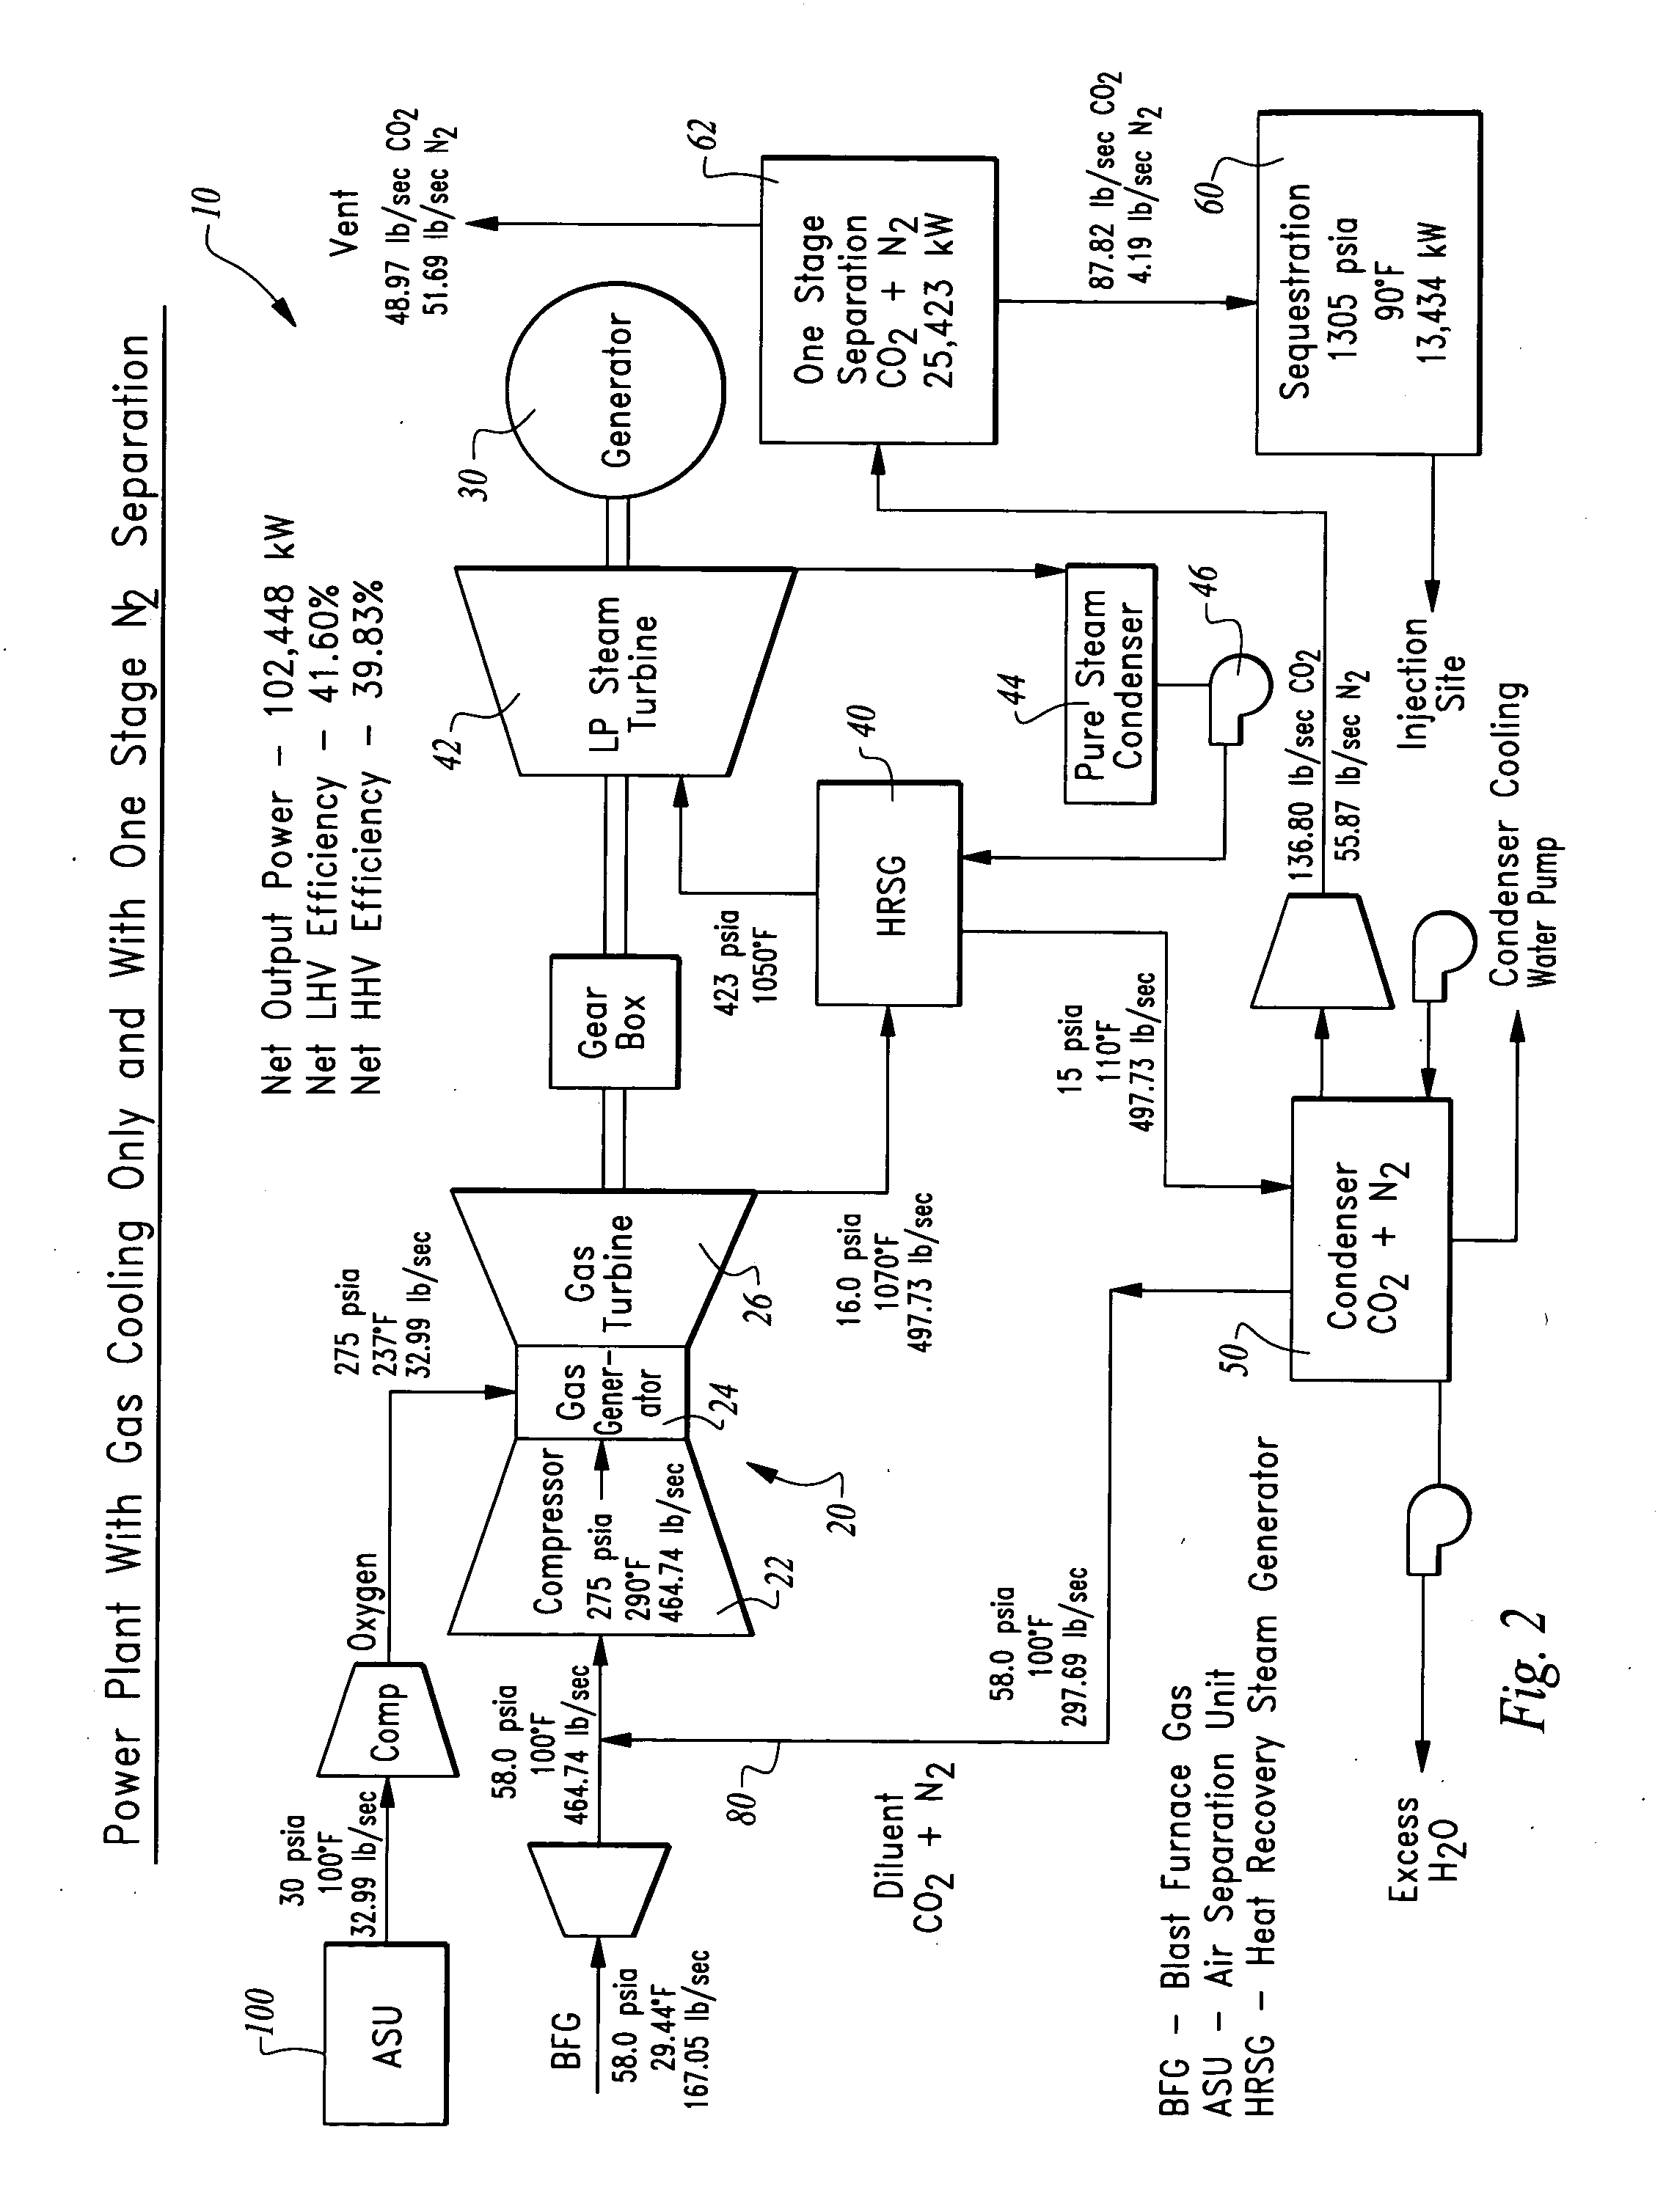 Methods of oxy-combustion power generation using low heating value fuel